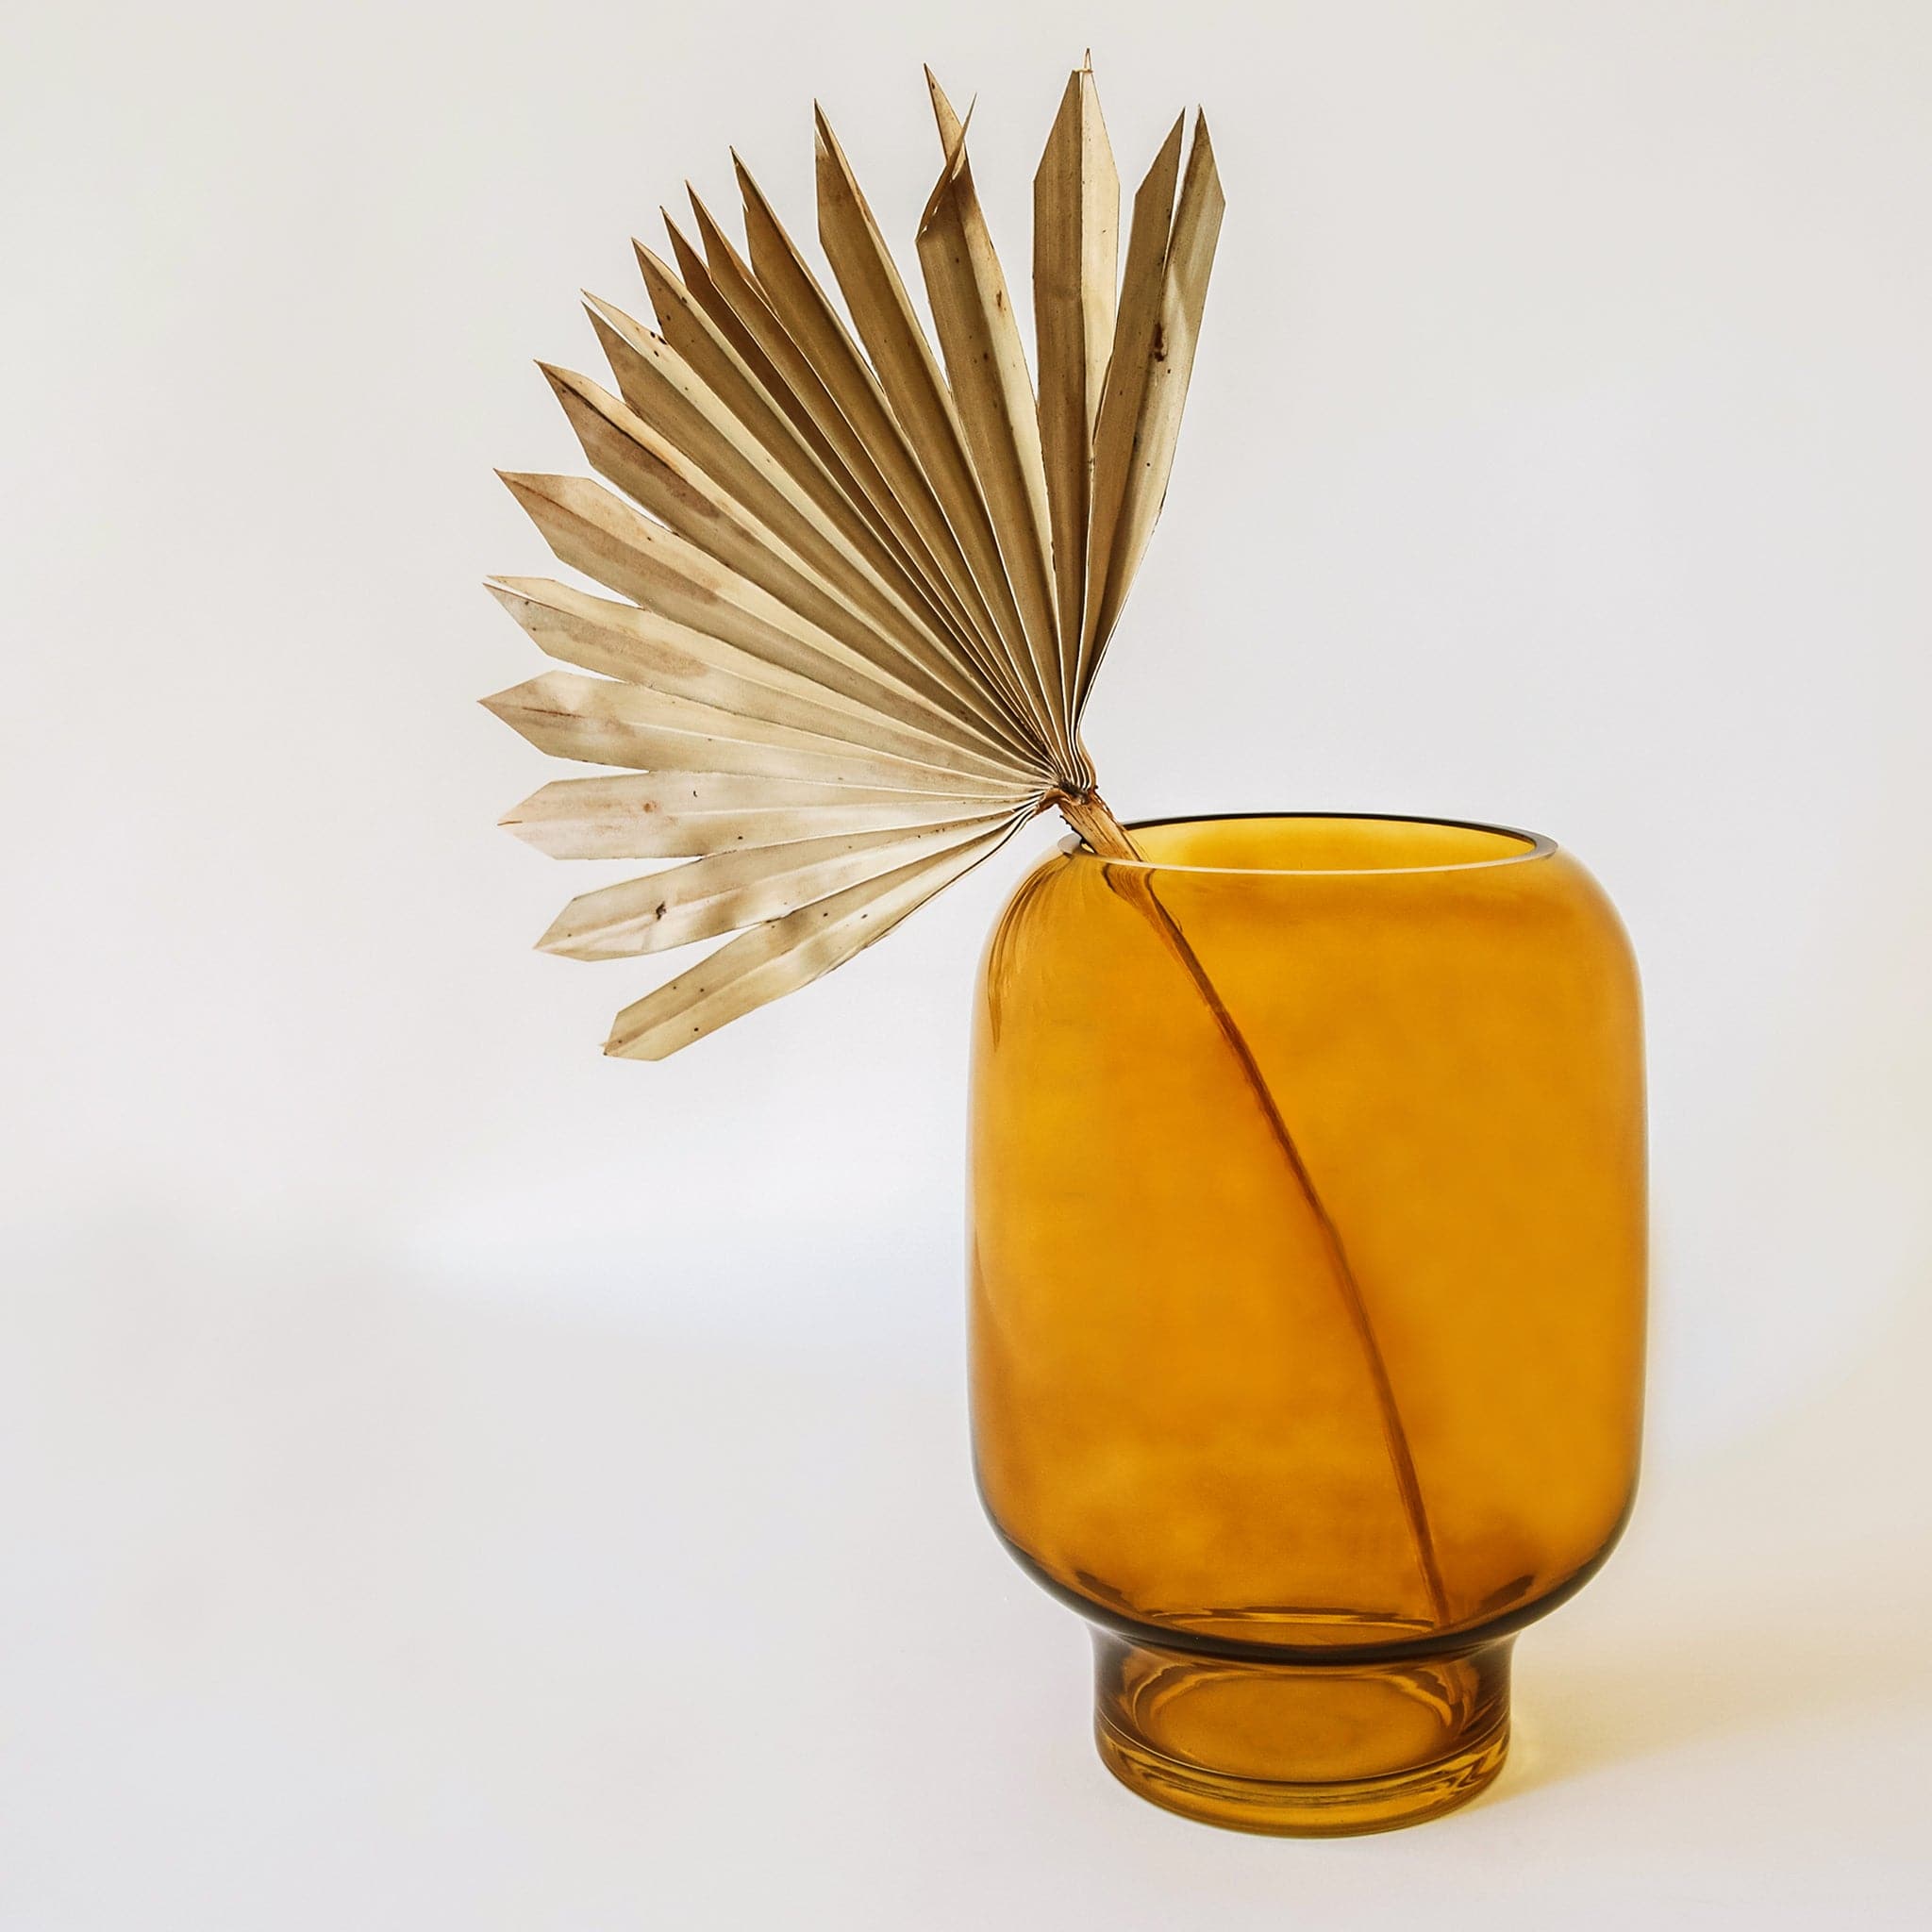 The sun cut fan spear styled in a clear amber vase. It is perfect as a statement piece with its showy fronds.